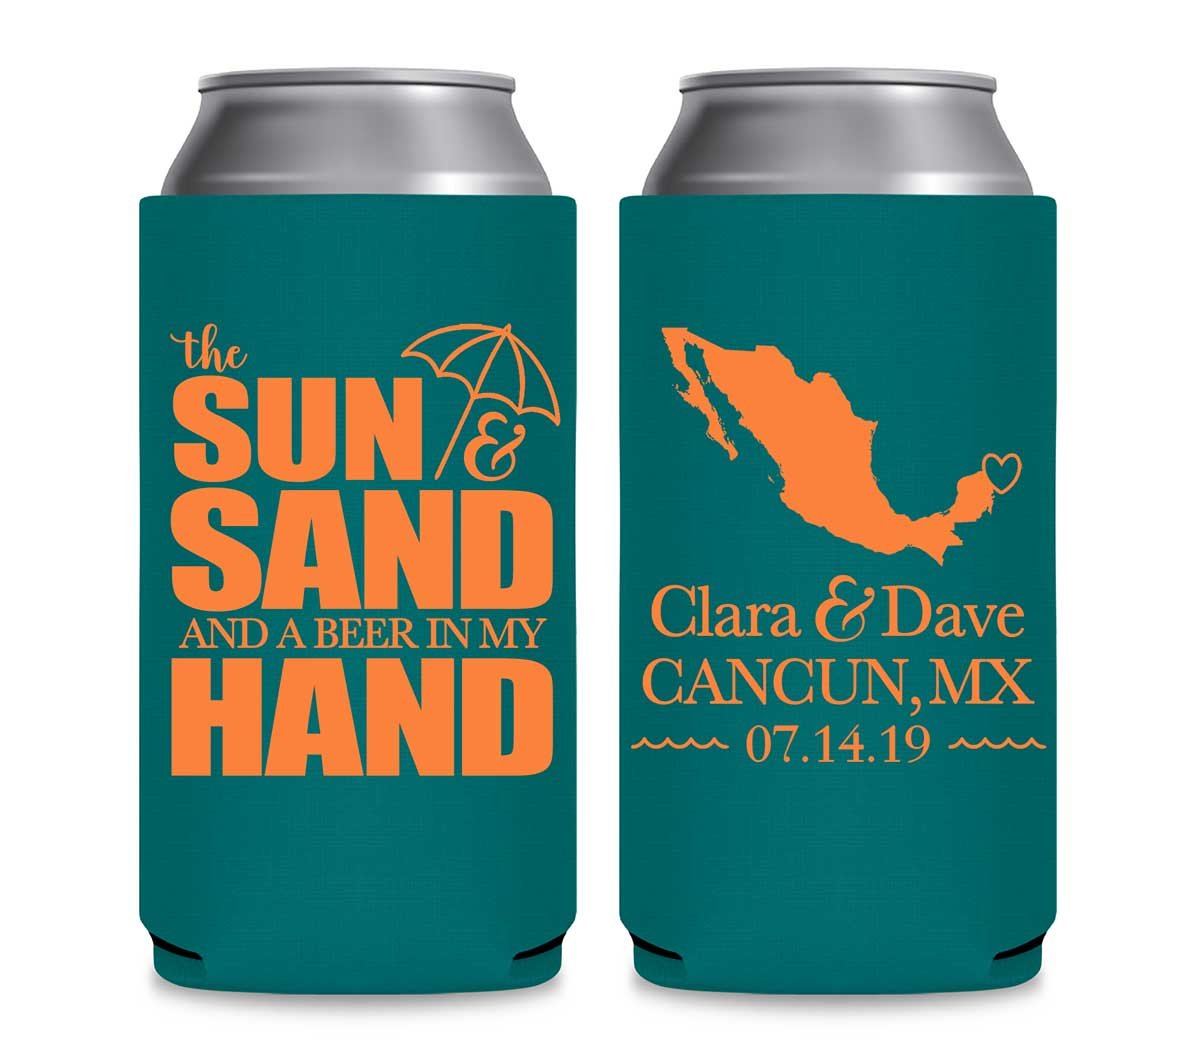 The Sun & The Sand Beer In My Hand 1B Any Map Foldable 12 oz Slim Can Koozies Wedding Gifts for Guests